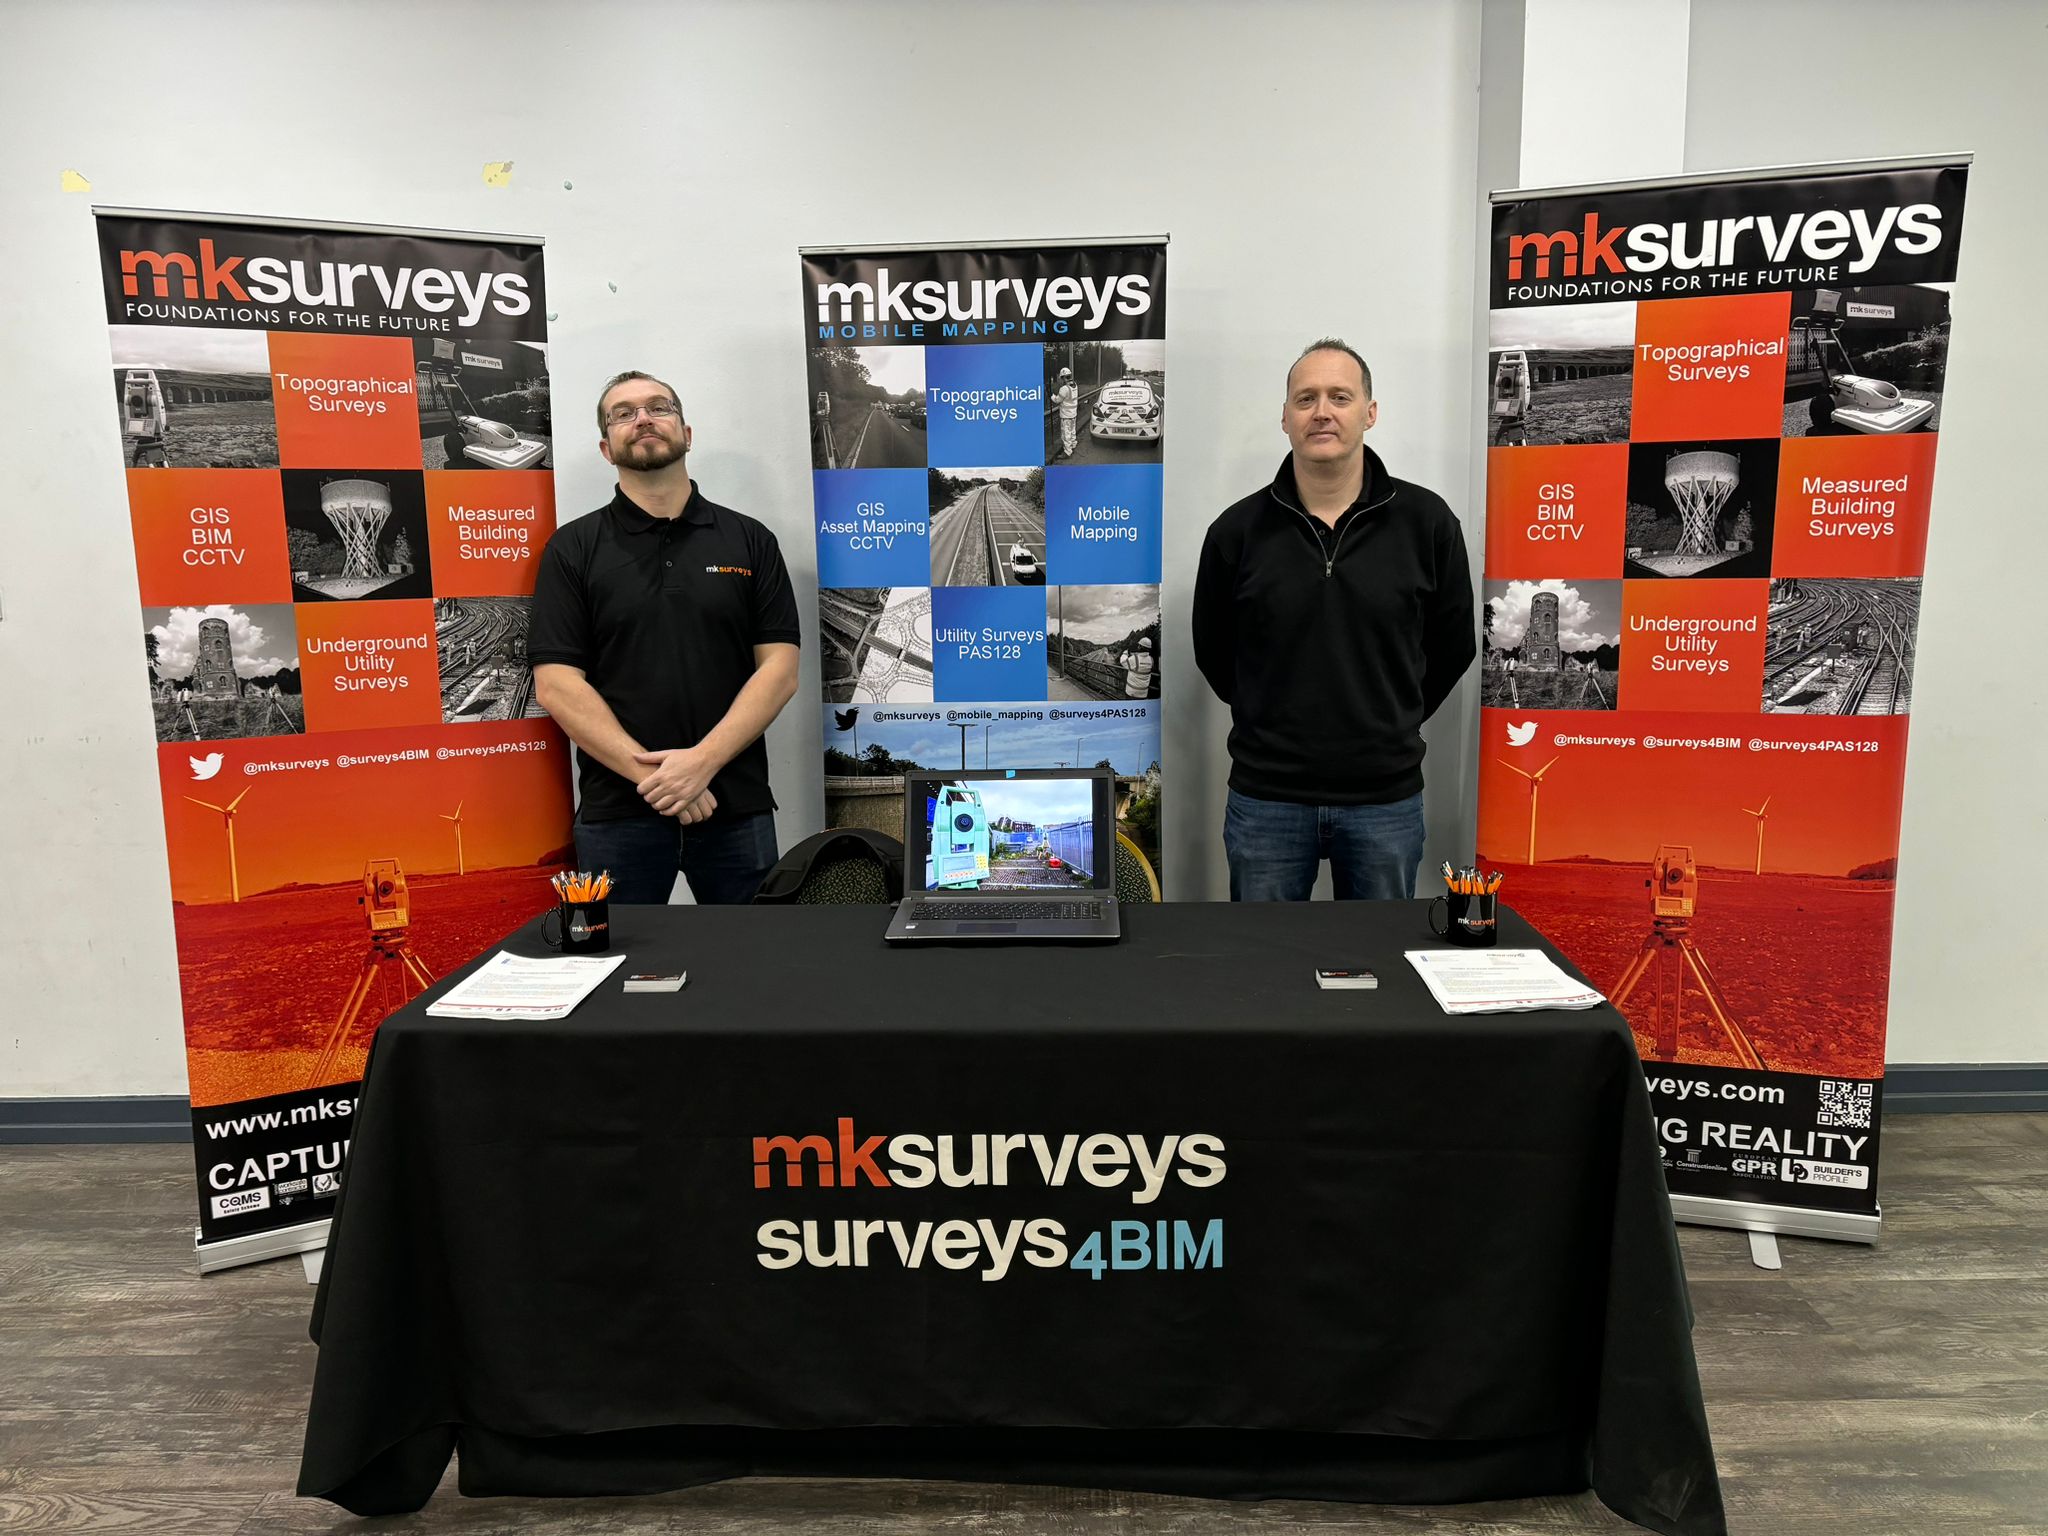 MK Surveys at our event in Northampton